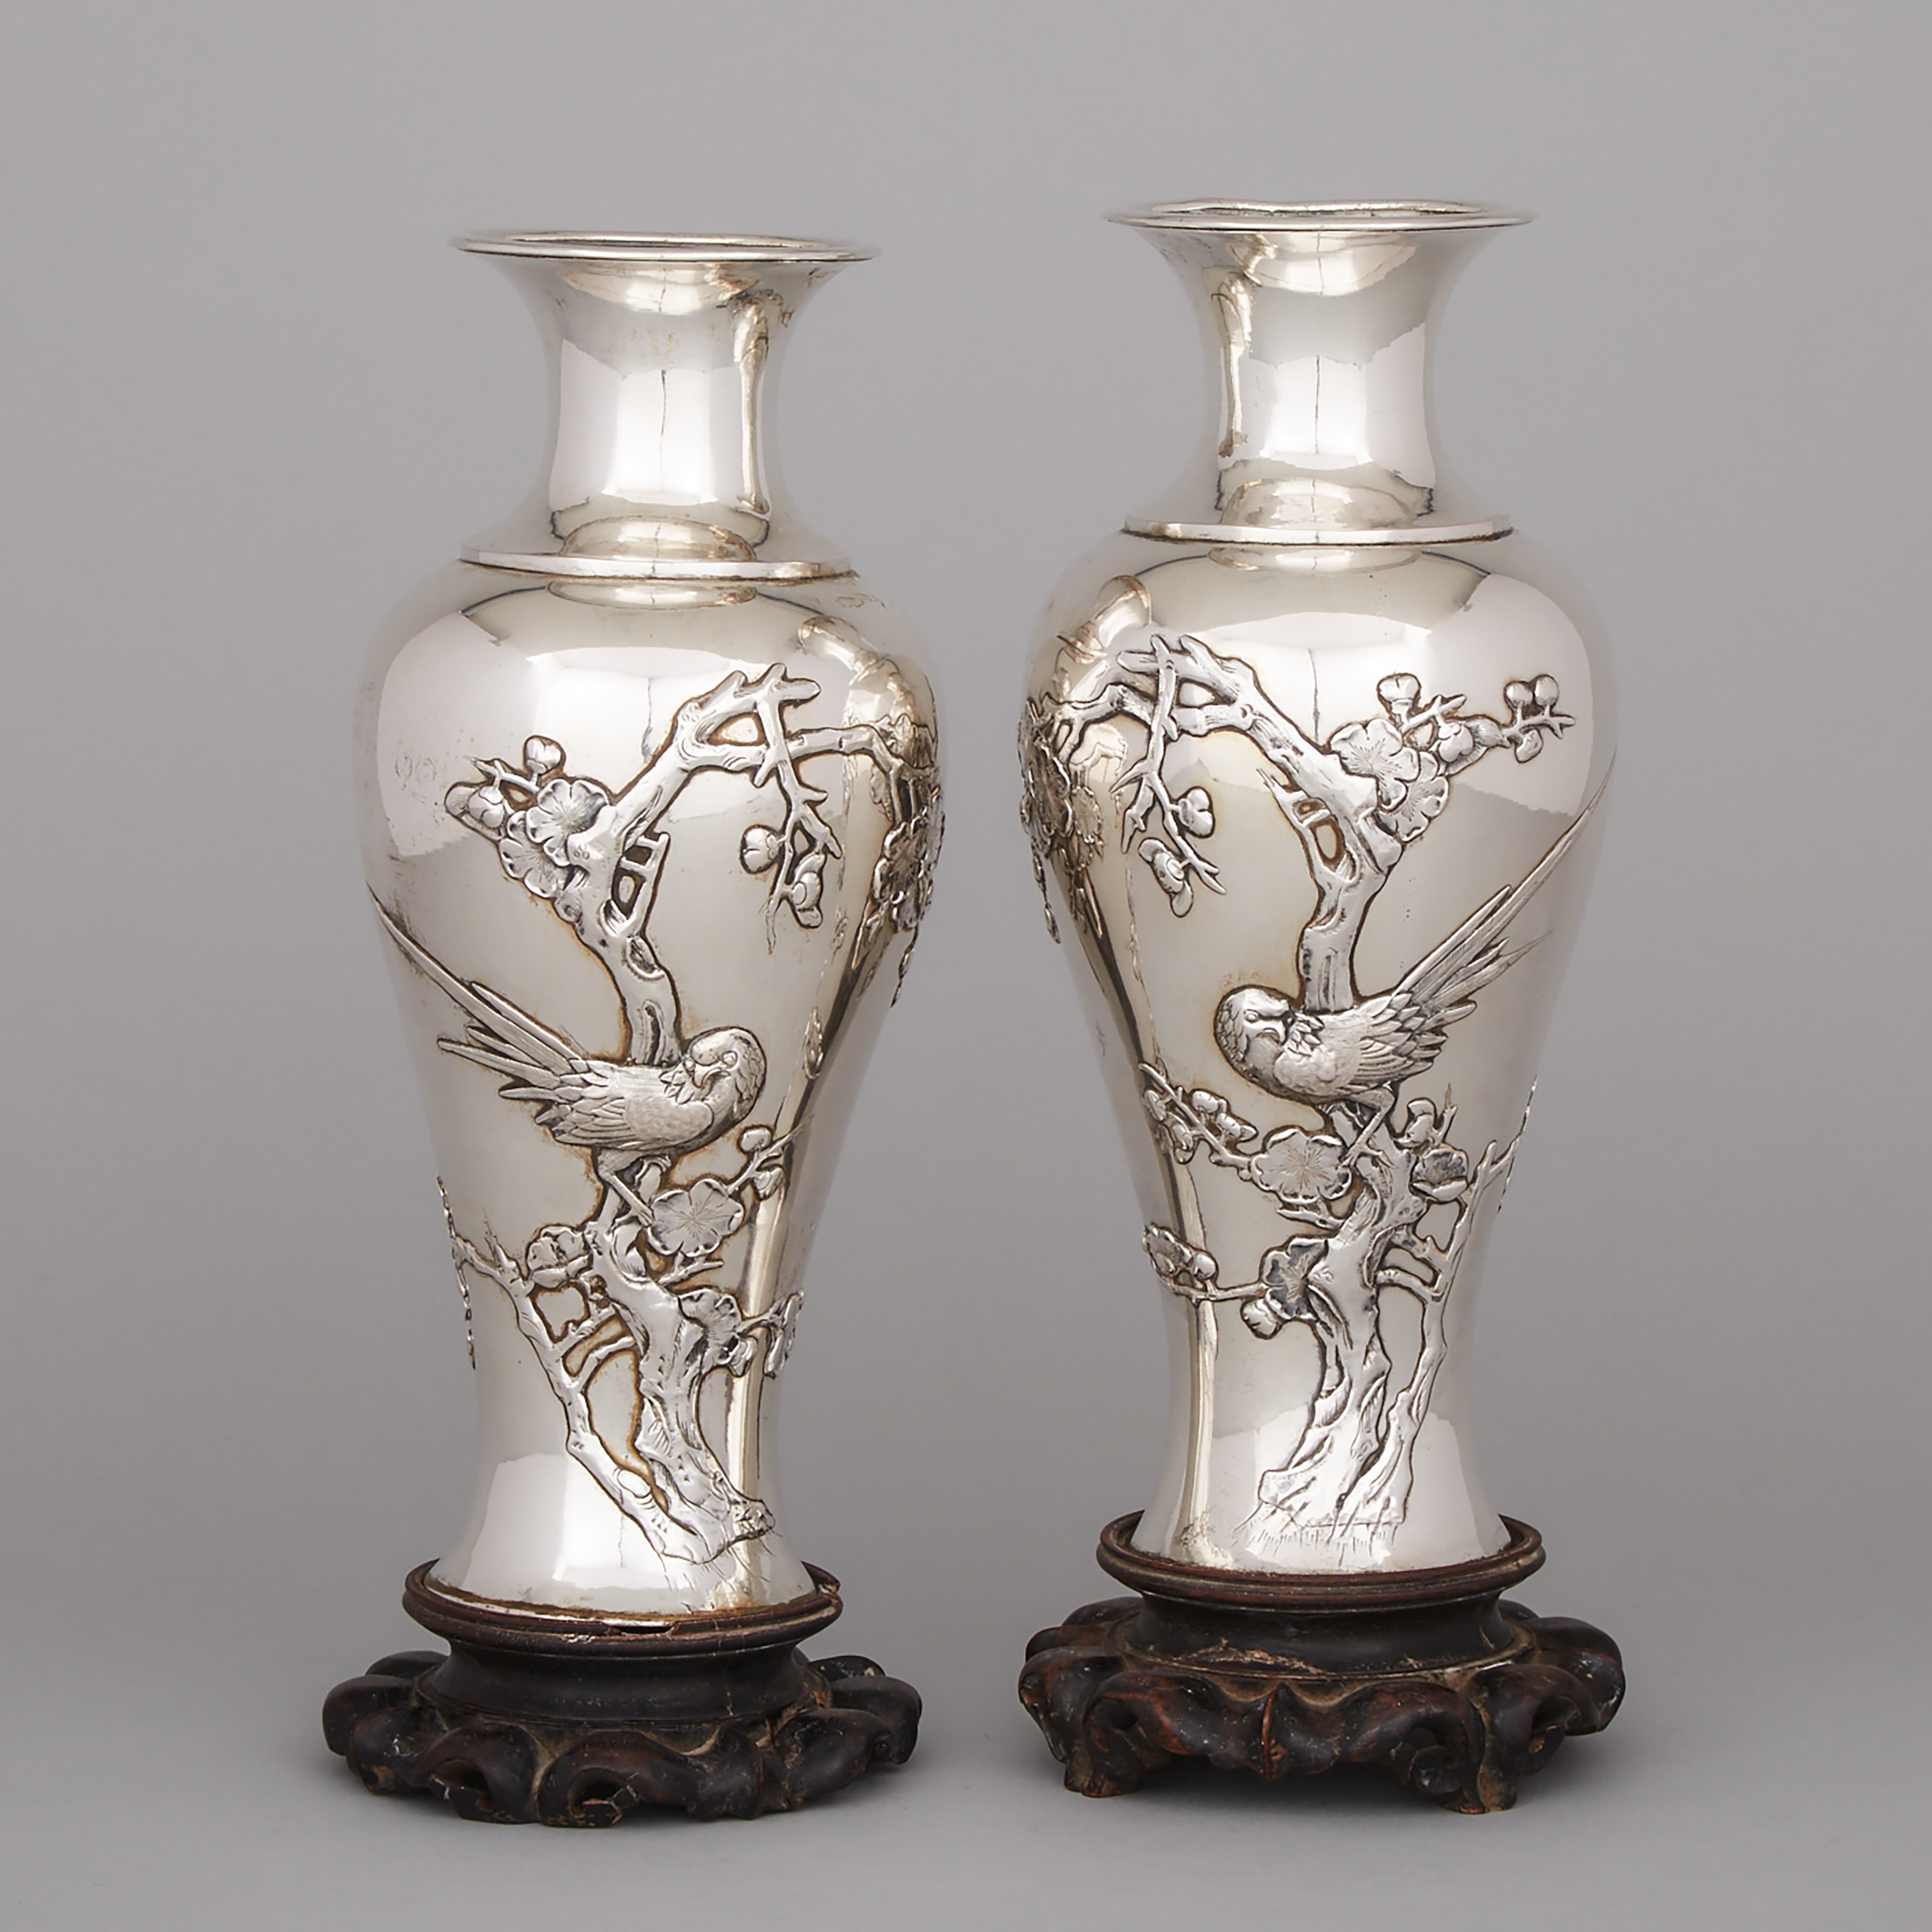 Pair of Chinese Export Silver Vases, Pao Kuang, Canton, late 19th/early 20th century